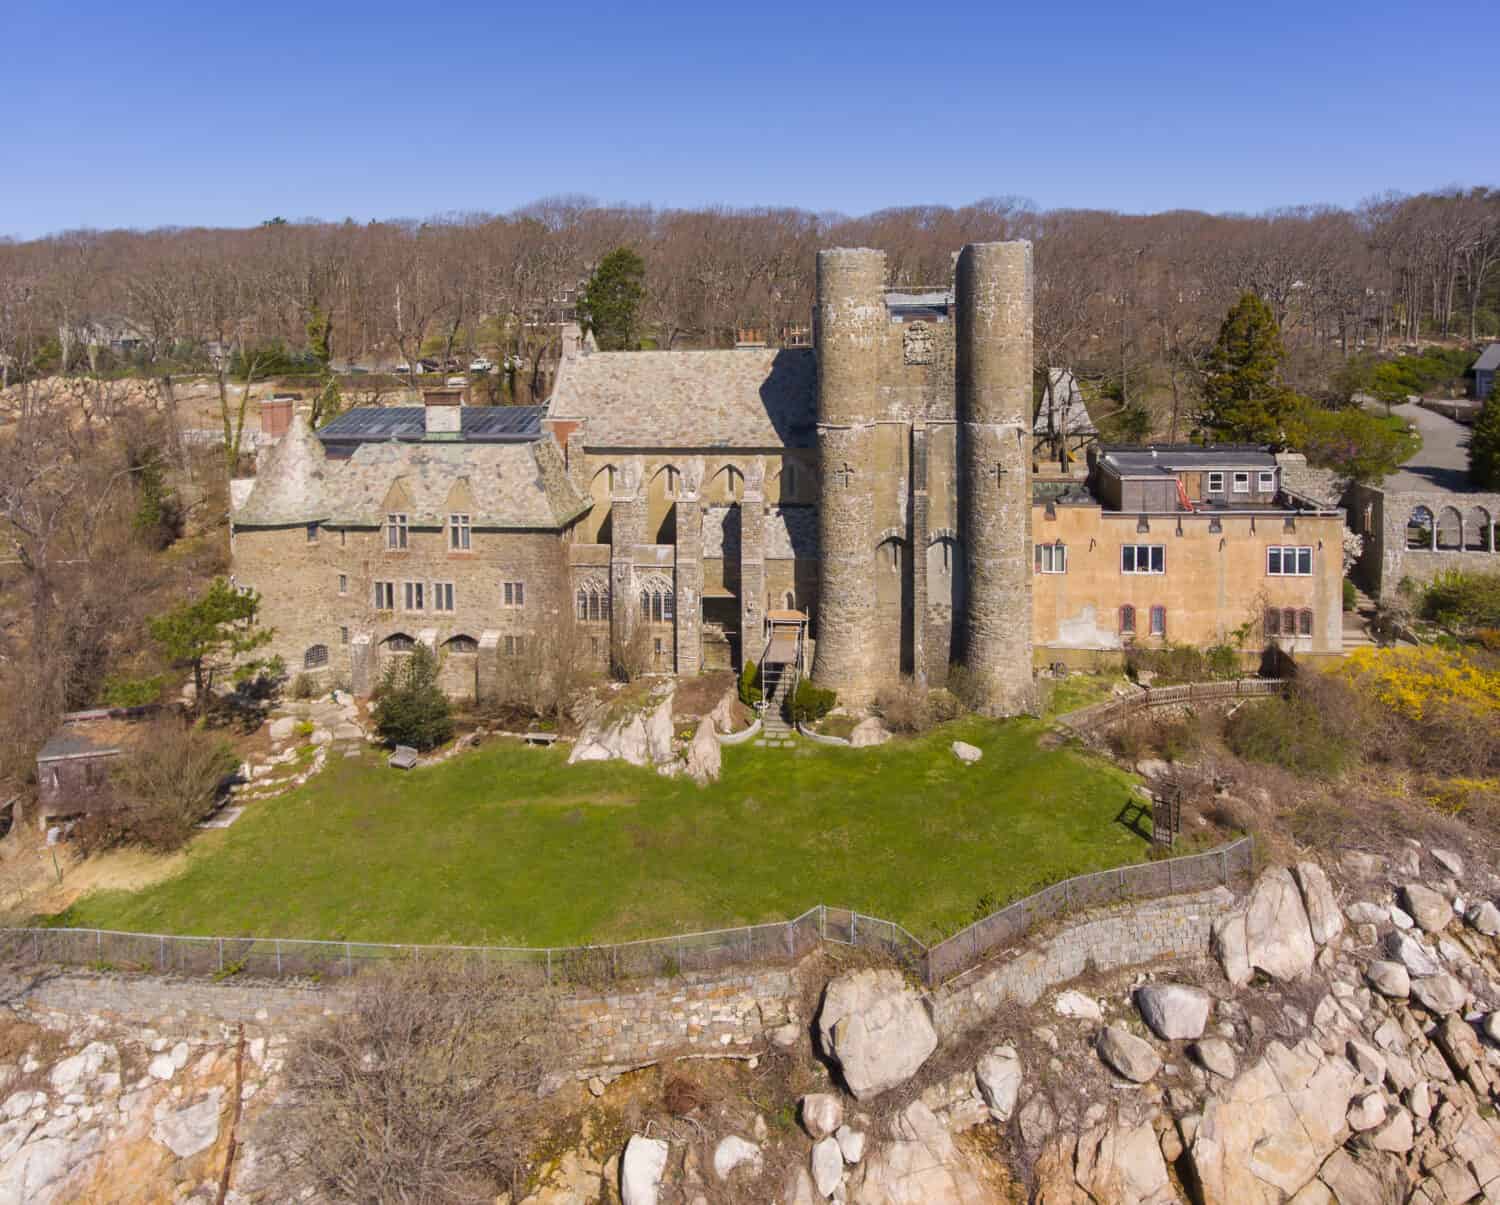 Aerial view of Hammond Castle in village of Magnolia in city of Gloucester, Massachusetts MA, USA. This building was built in 1926 on the coast of Gloucester Harbor.